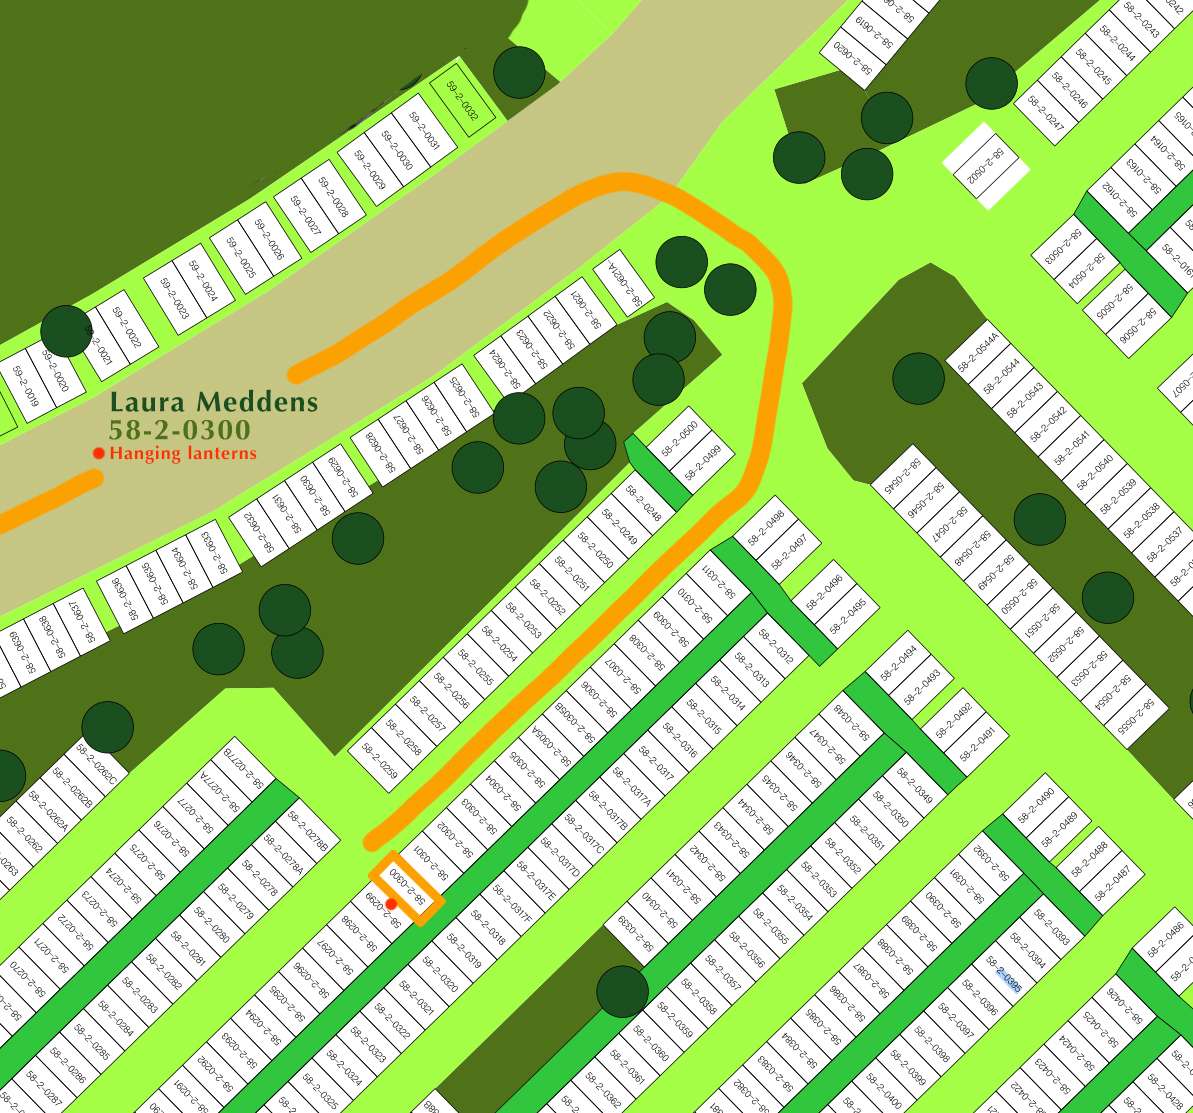 Detailed map of Laura's grave number 58-2-0300